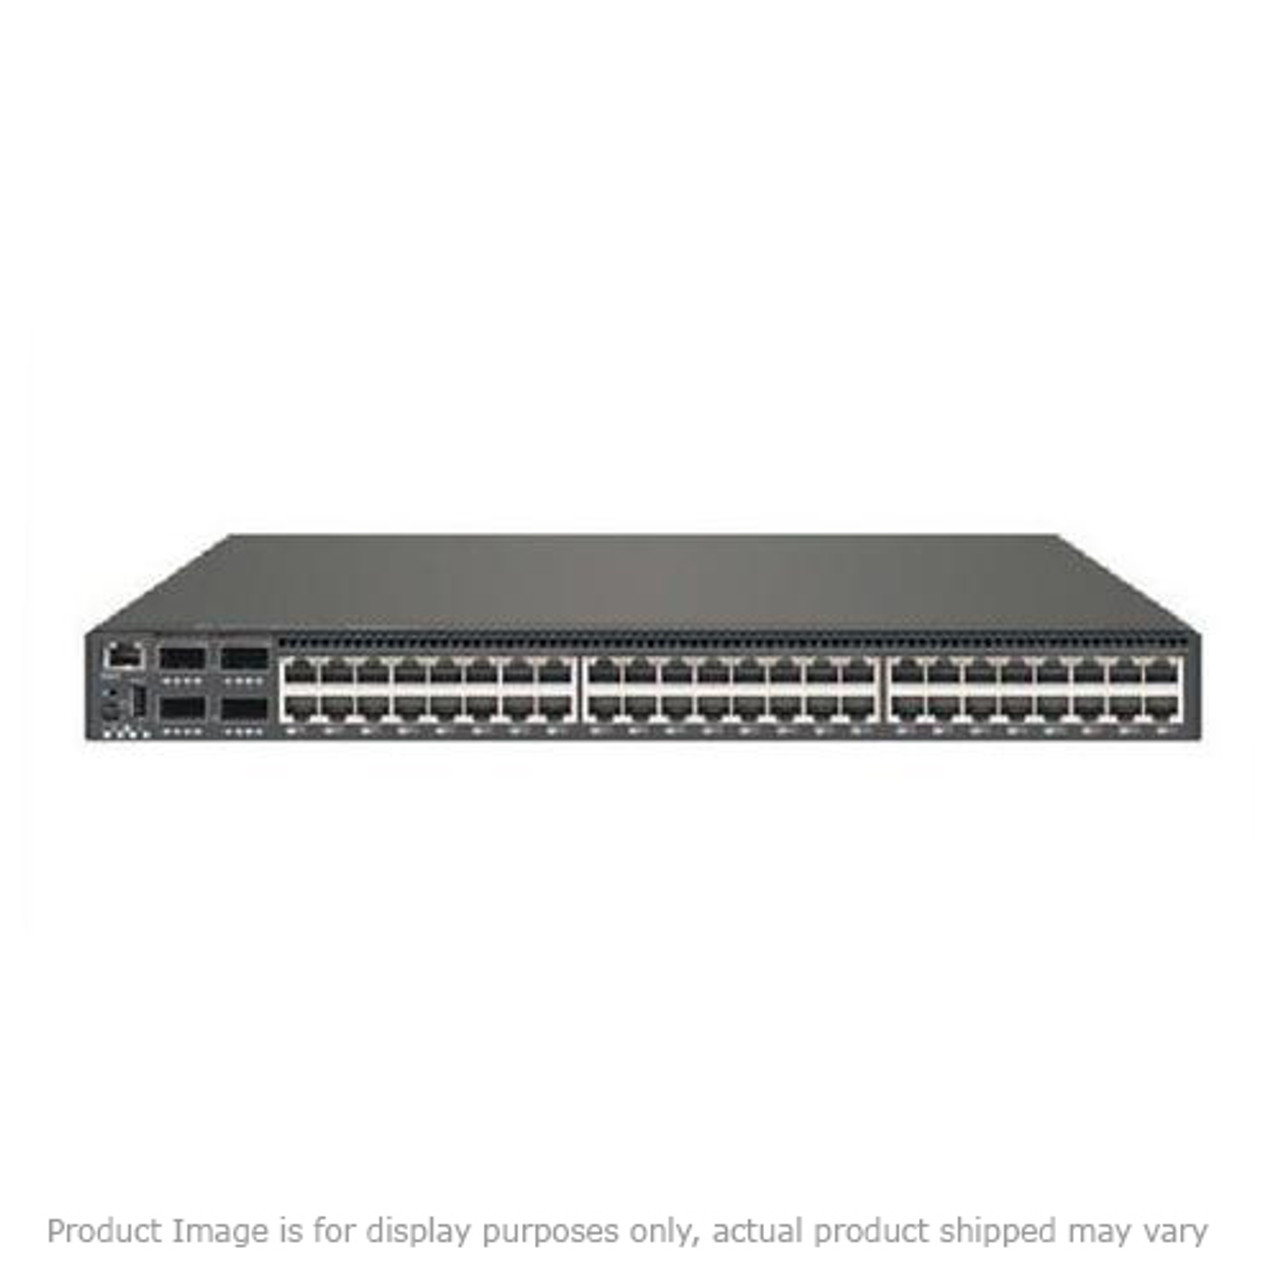 3C16790A 3Com OfficeConnect 5-Port 100Mbps External Fast Ethernet Dual Speed 5 Plus Switch (Refurbished)